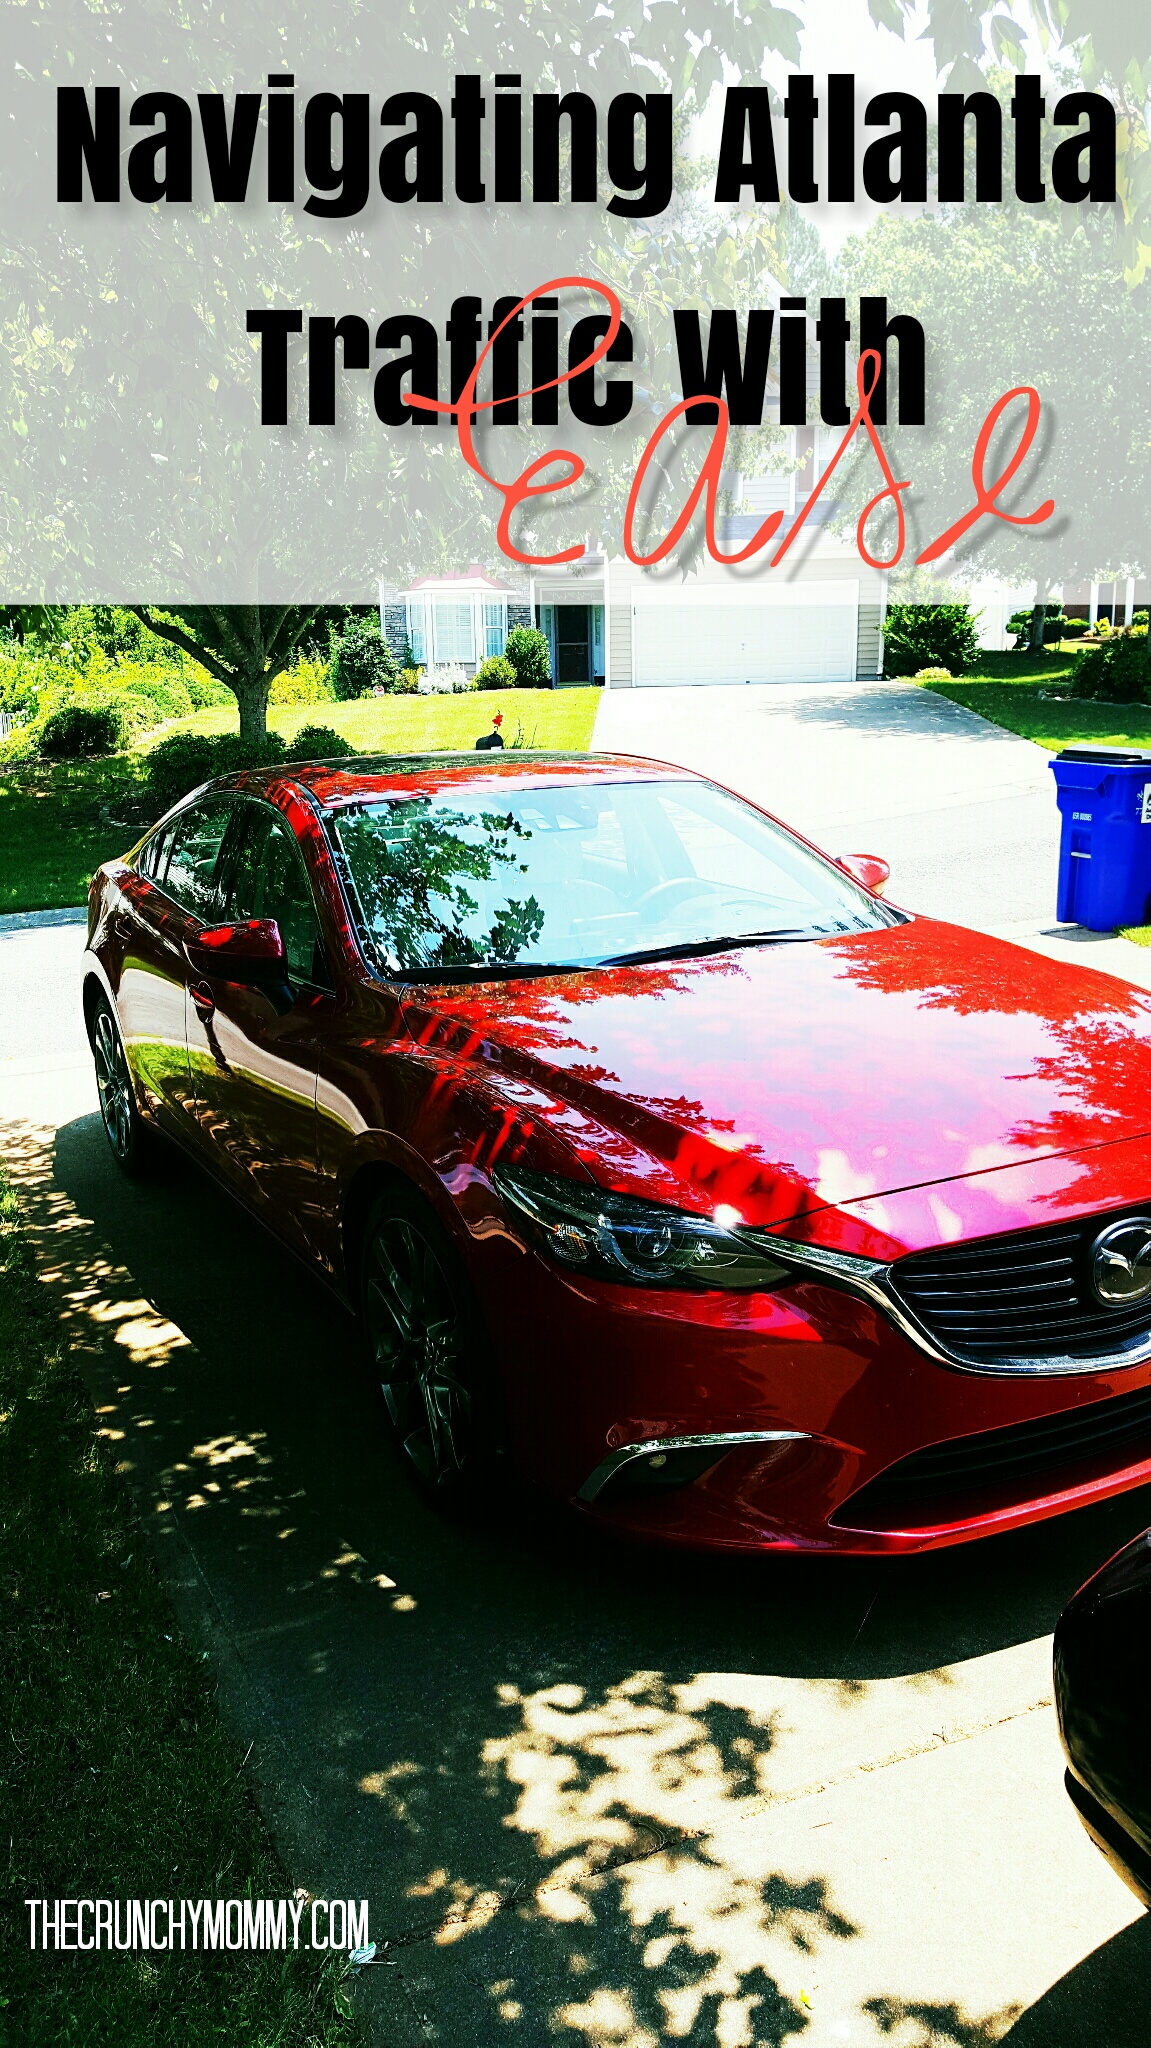 Atlanta traffic can make the strongest person cry but I cruised through happily in the 2016 Mazda 6 as I took a solo road trip. Read on for more deets!